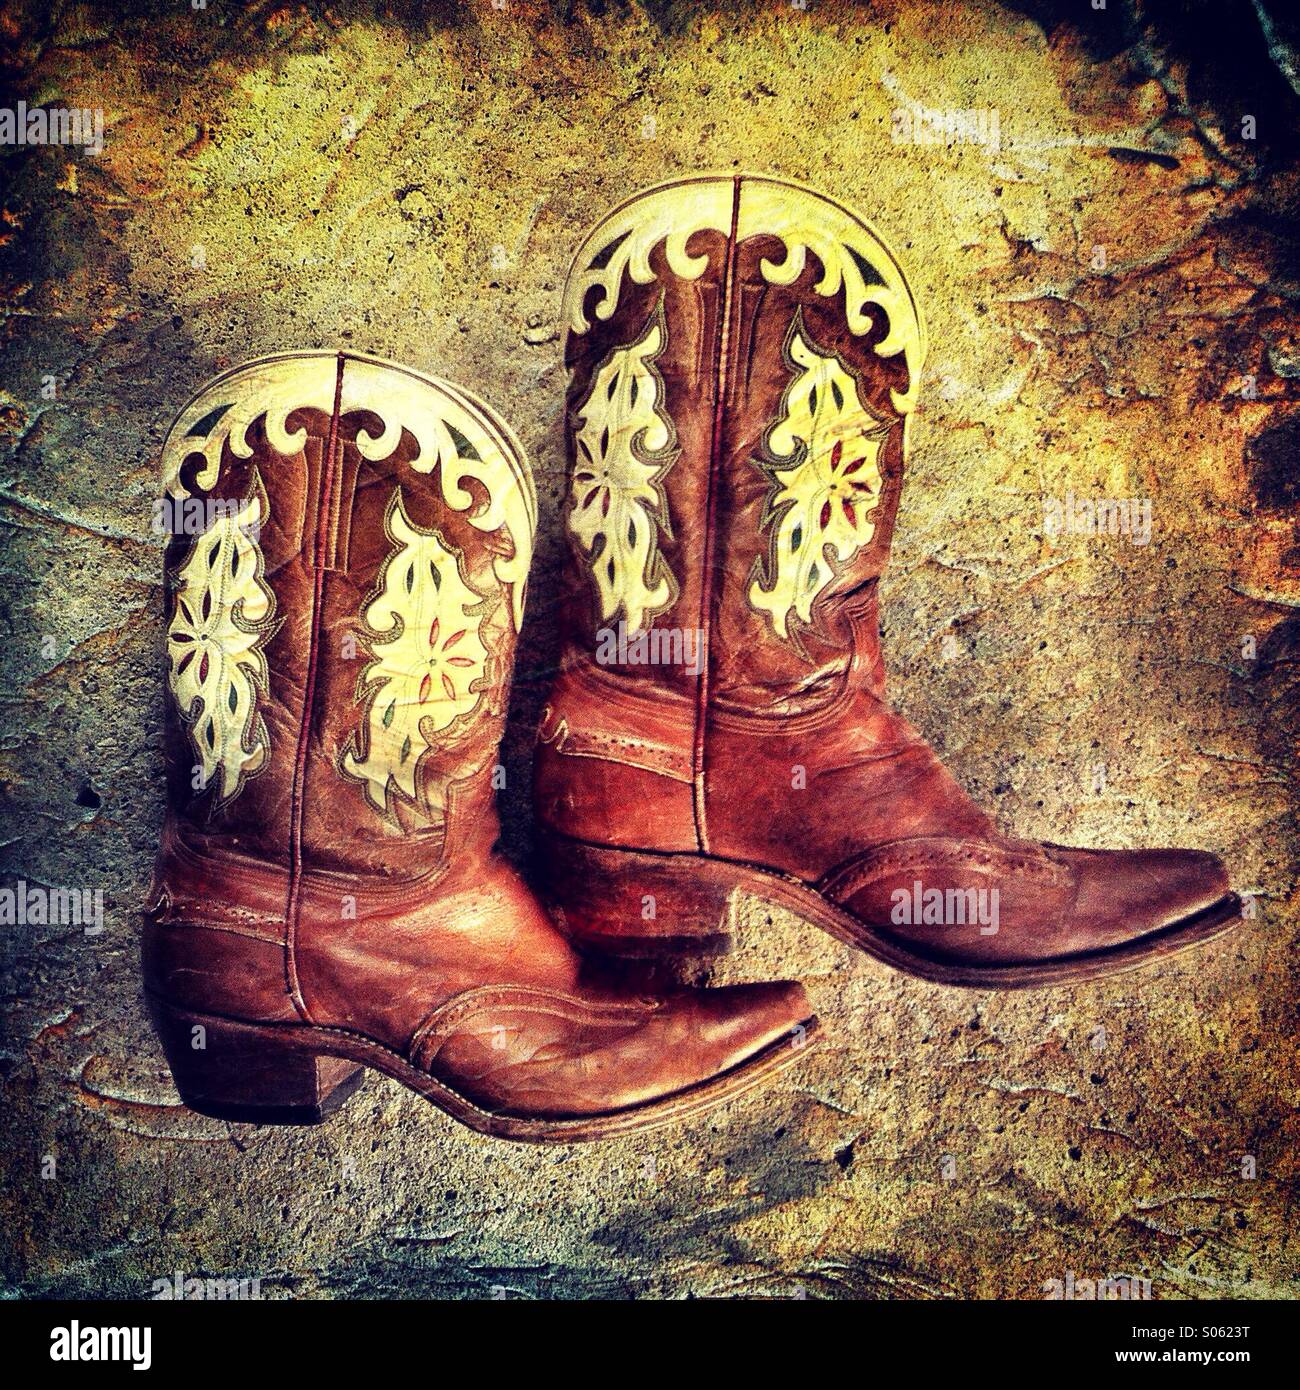 Vintage Cowboy Boots High Resolution Stock Photography and Images - Alamy